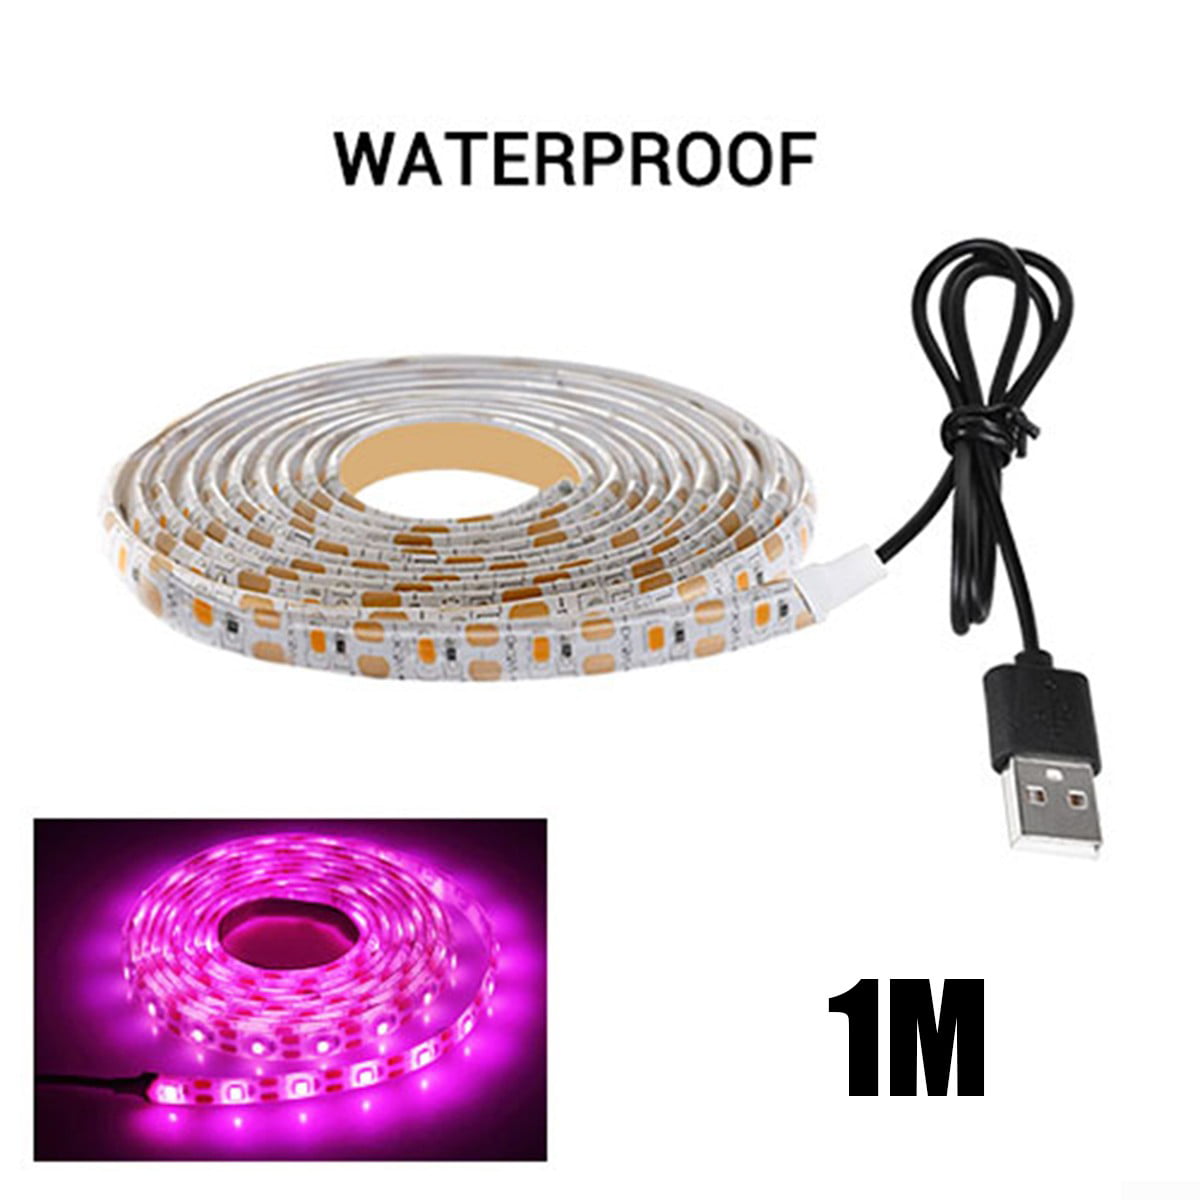 Details about   USB LED Grow Light Strip Full Spectrum 2835 Strip for Indoor Plant Growing Lamp 